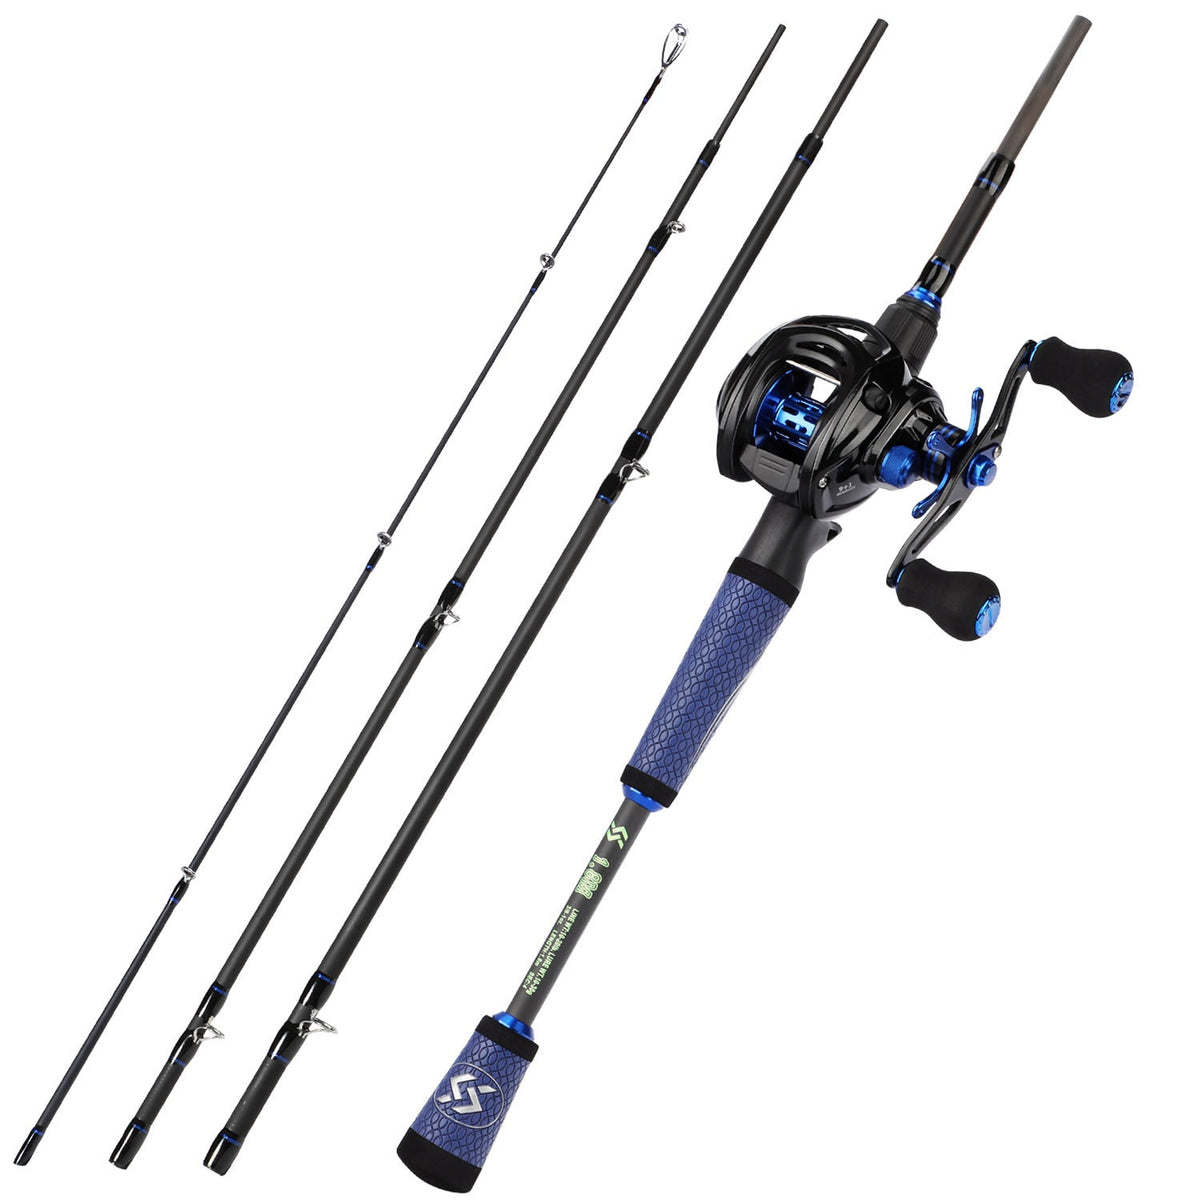 Sougayilang 2.1M Spinning Fishing Rod Combos 2 Section Carbon